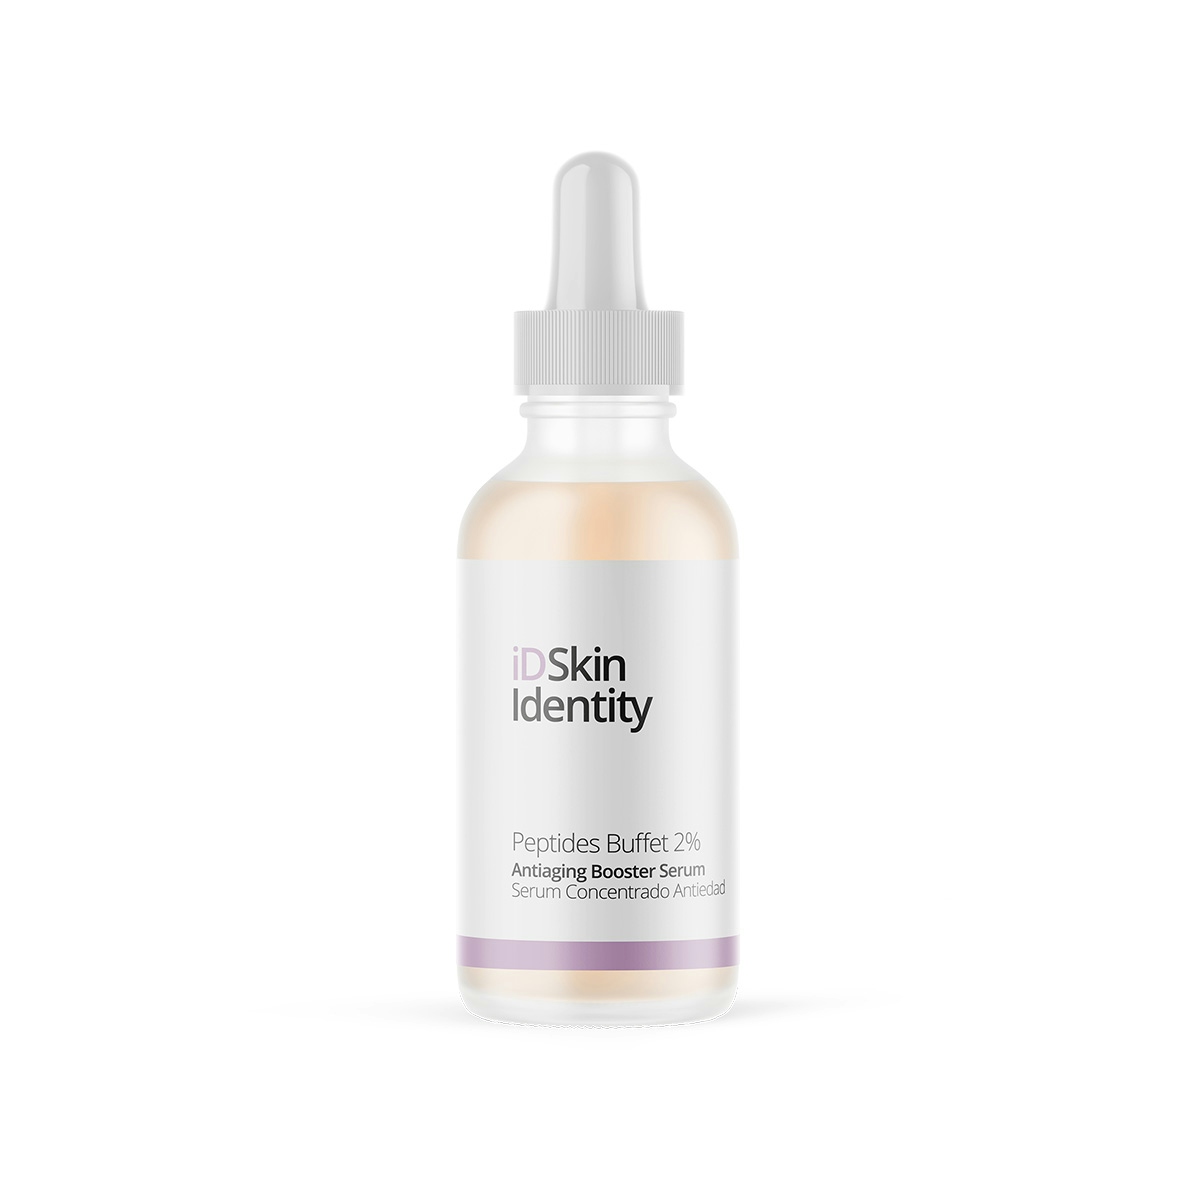 Serum Antiaging Booster Peptides Buffet 2% ID SKIN IDENTITY